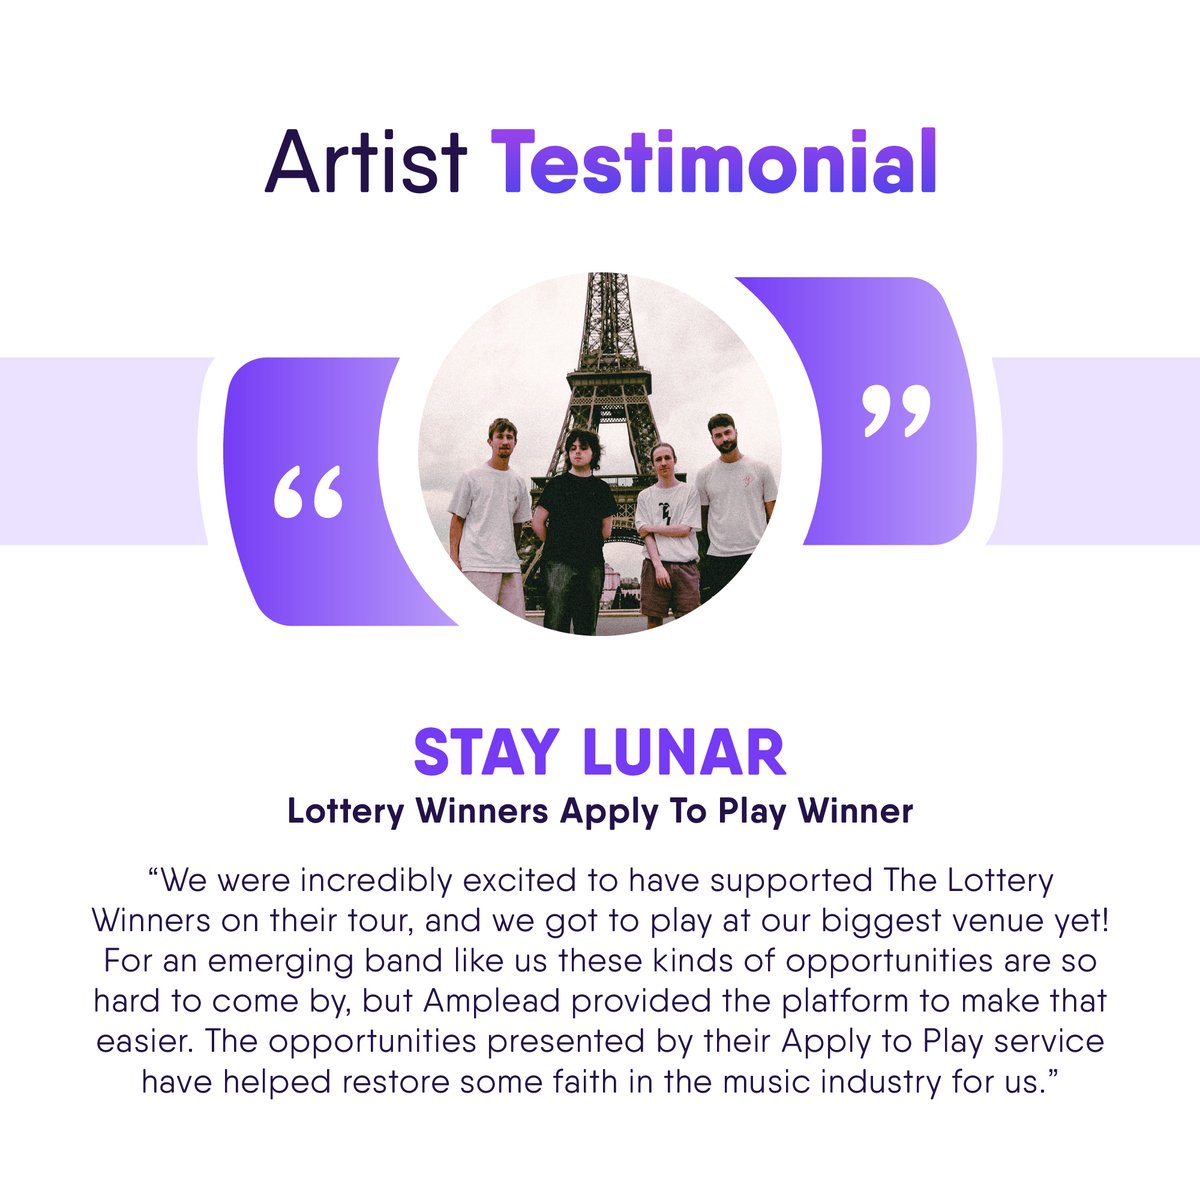 We have received some incredible feedback from artists who have used our Apply to Play service over the last year 🤩. From industry networking events, festivals, and tour-support slots, we have been able to provide artists with some great opportunities. Back in November,